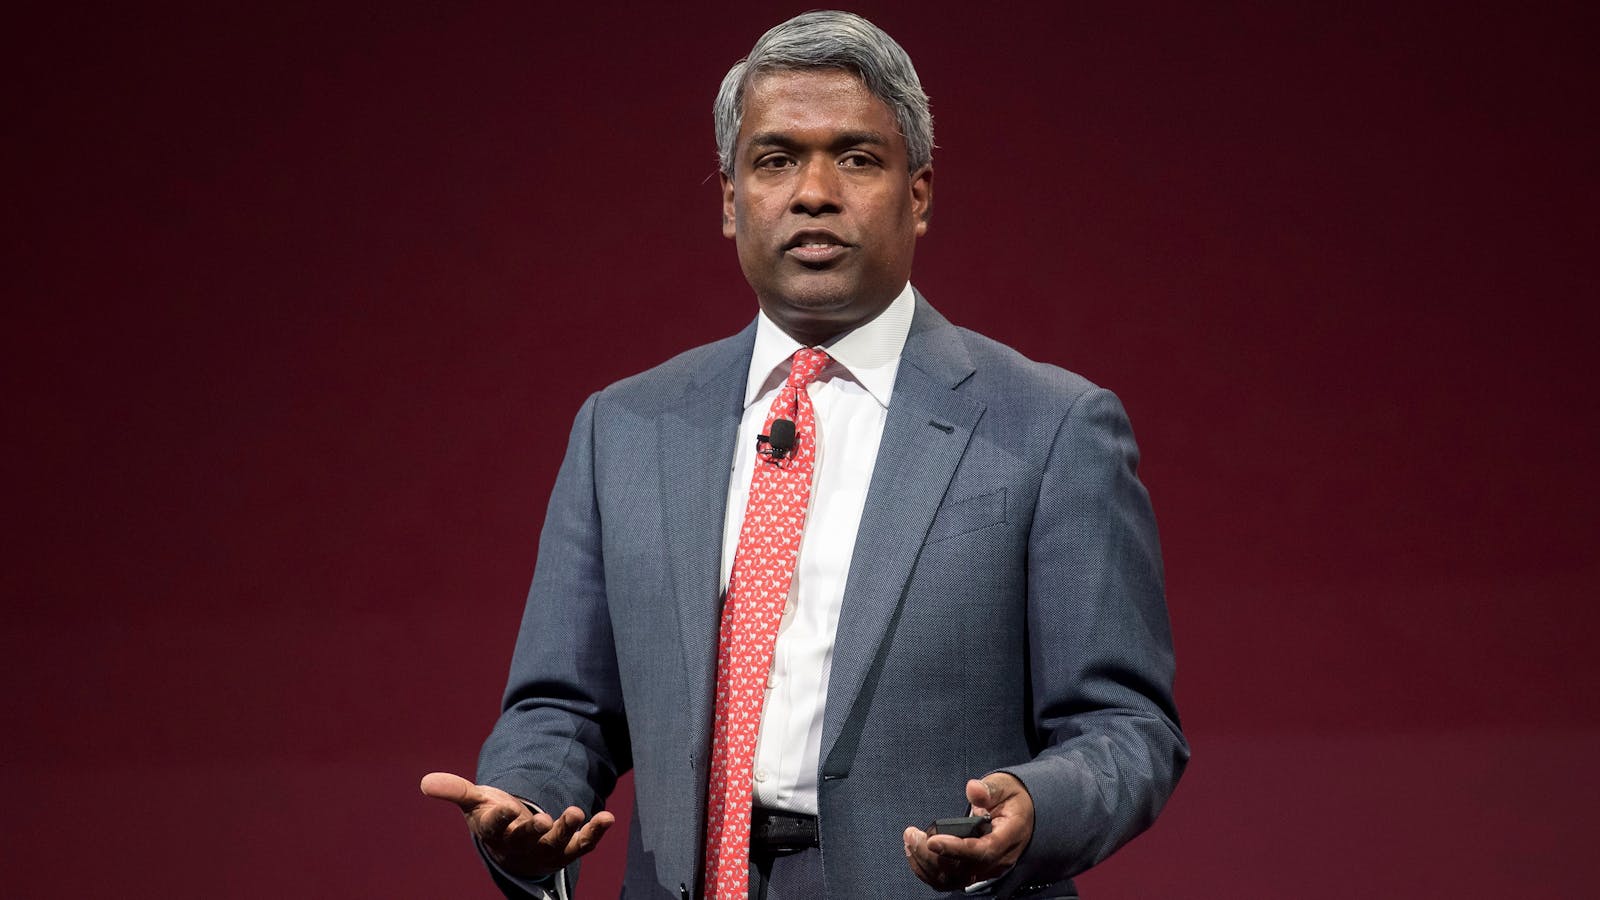 Oracle's former cloud chief Thomas Kurian. Photo by Bloomberg